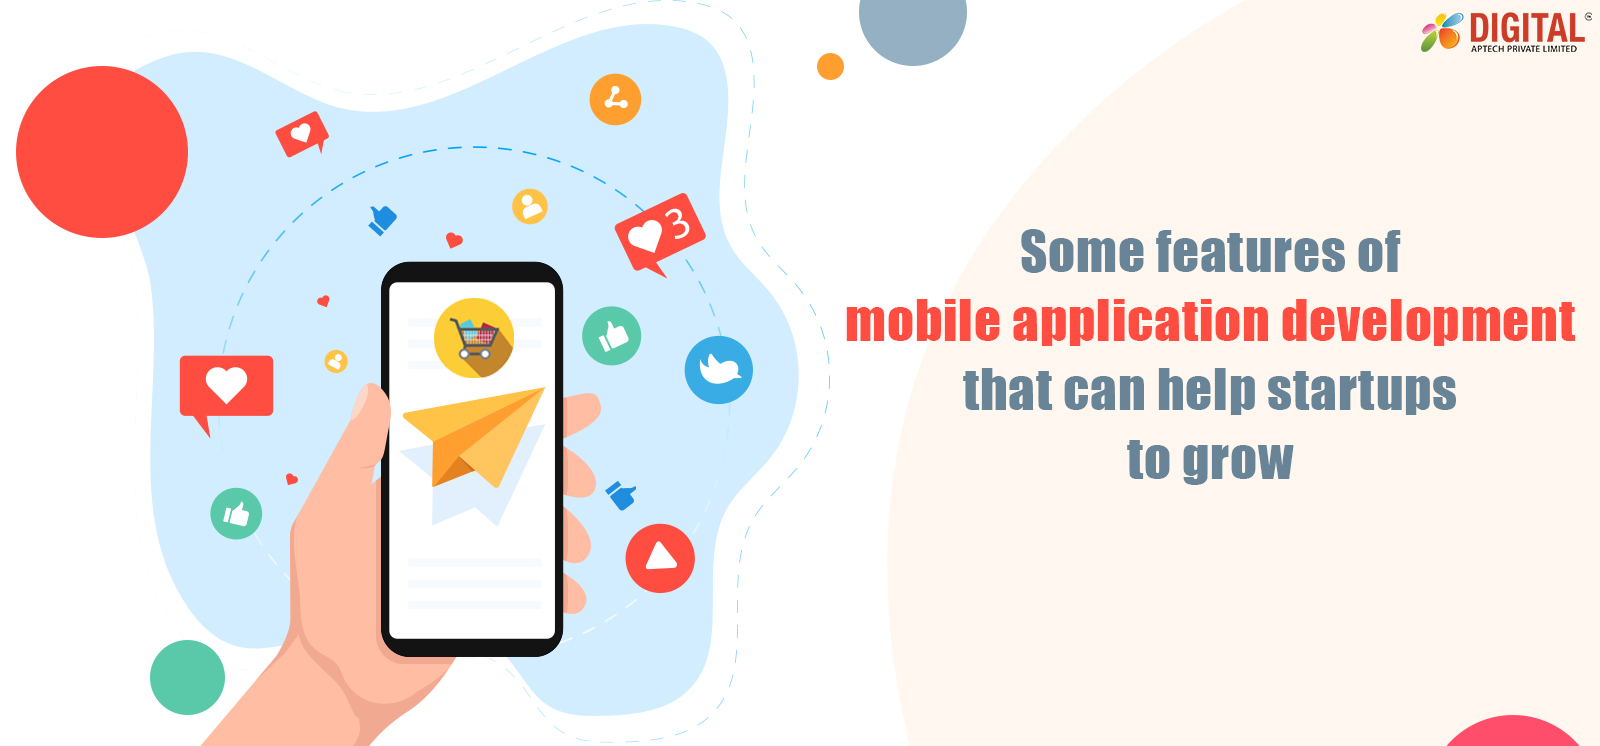 Some features of mobile application development that can help startups to grow